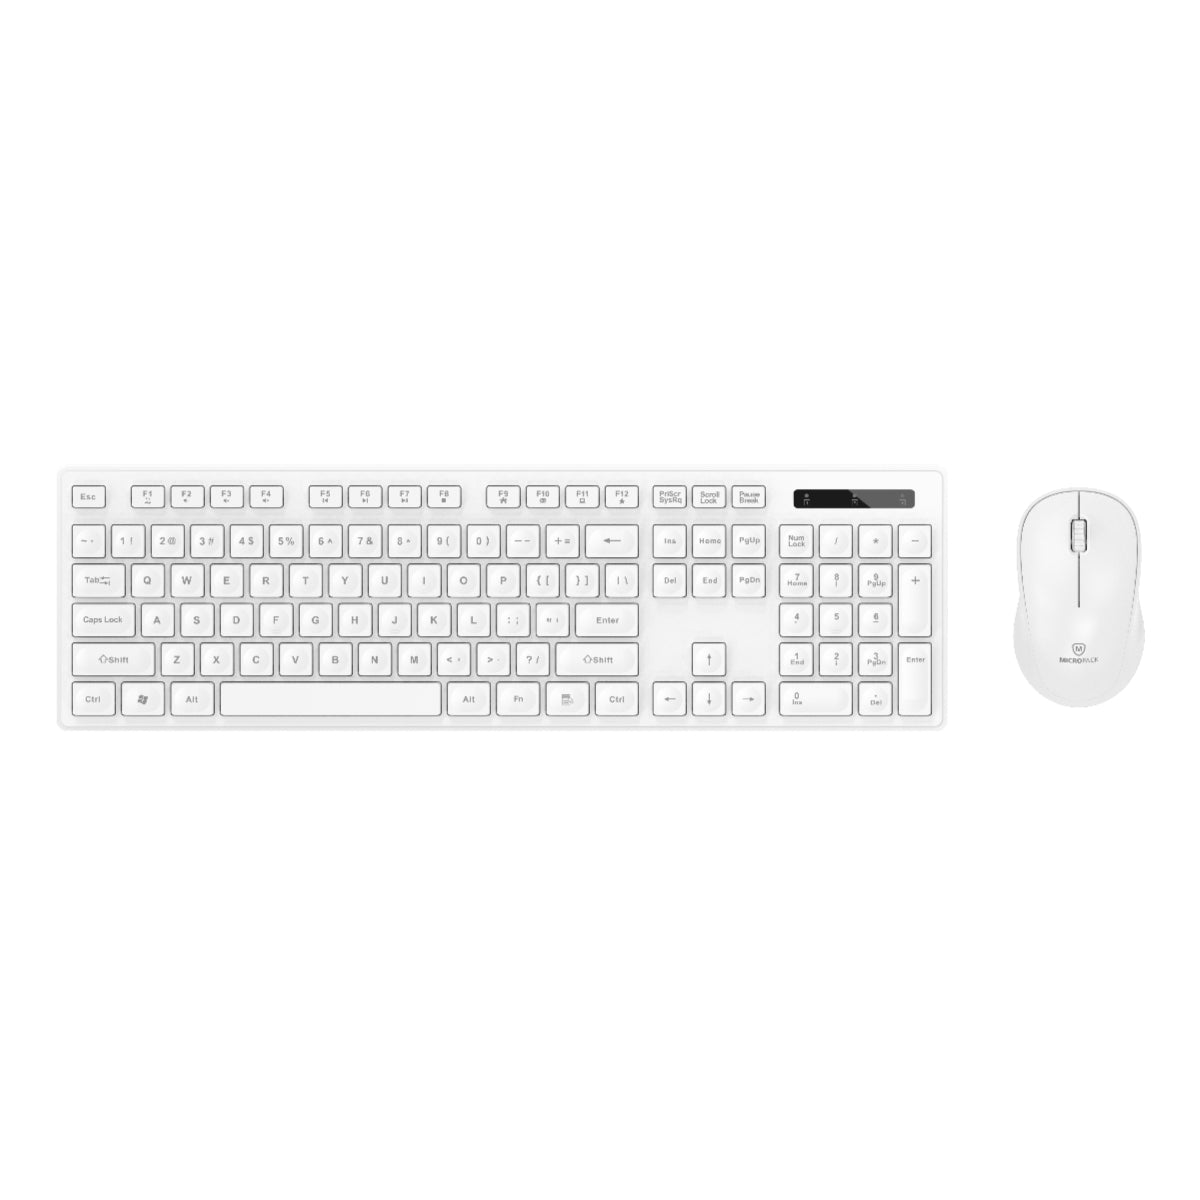 USB Wireless Mouse and Keyboard Combo for Laptop Computer KM-237W white